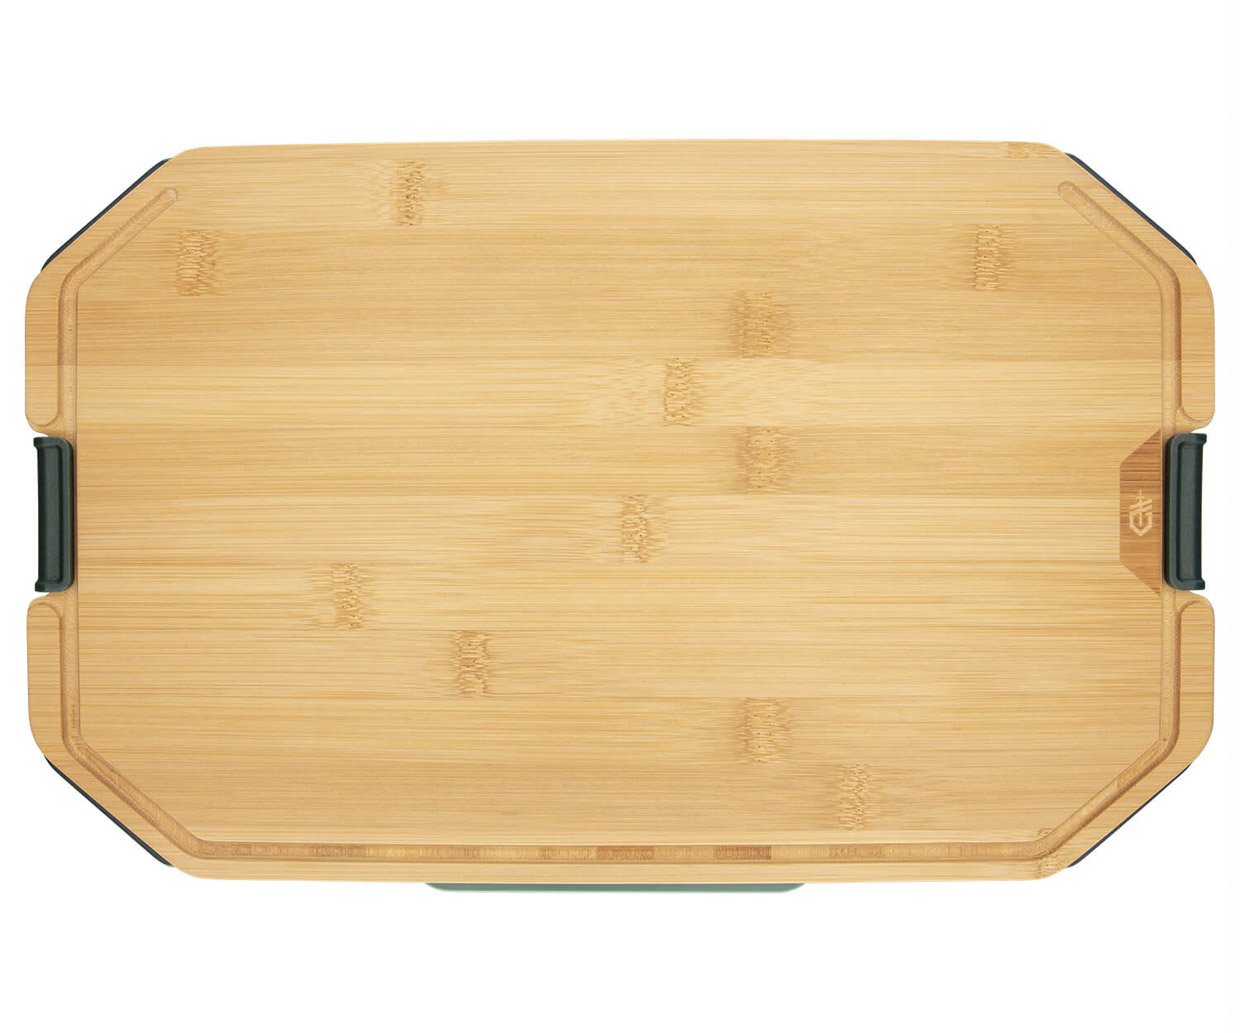 Gerber ComplEAT Cutting Board Set